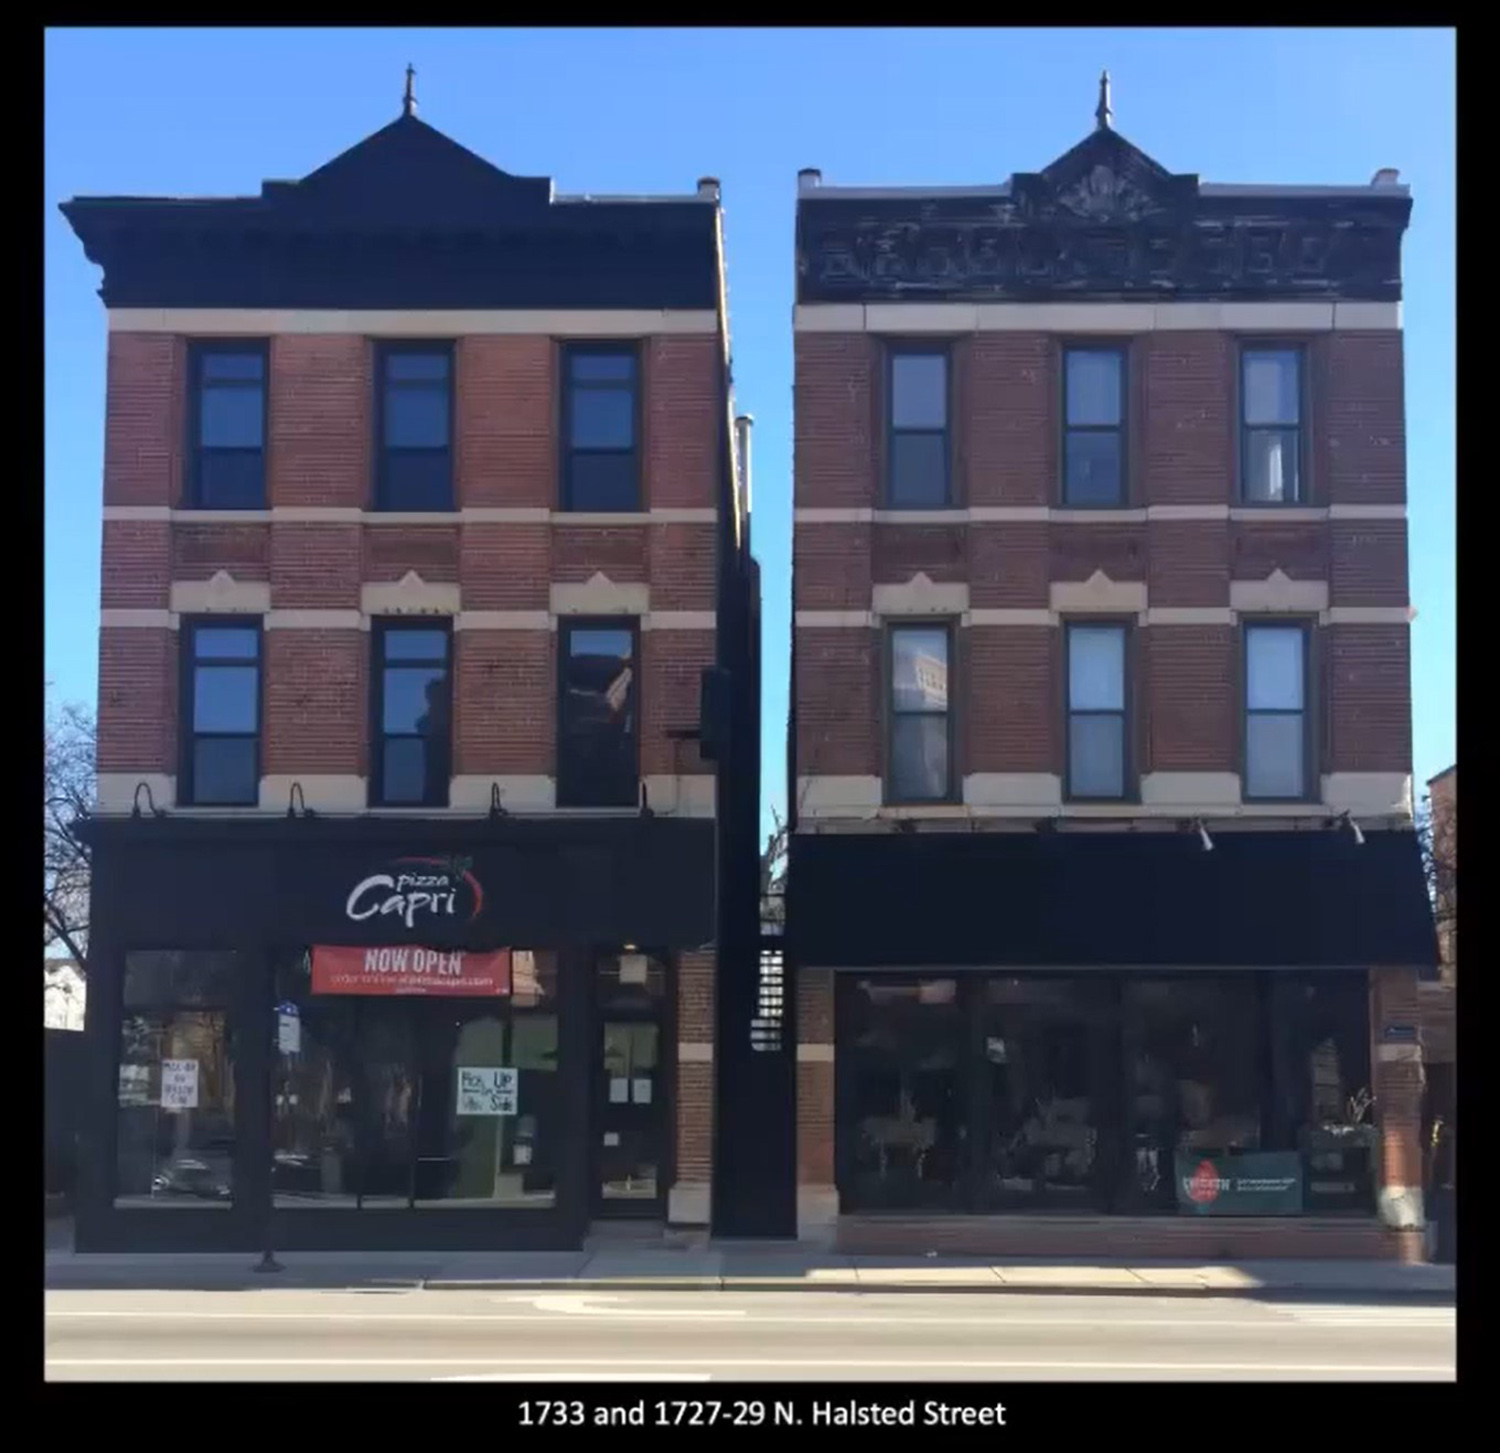 1727-29 and 1733 N Halsted Street. Image by CCL